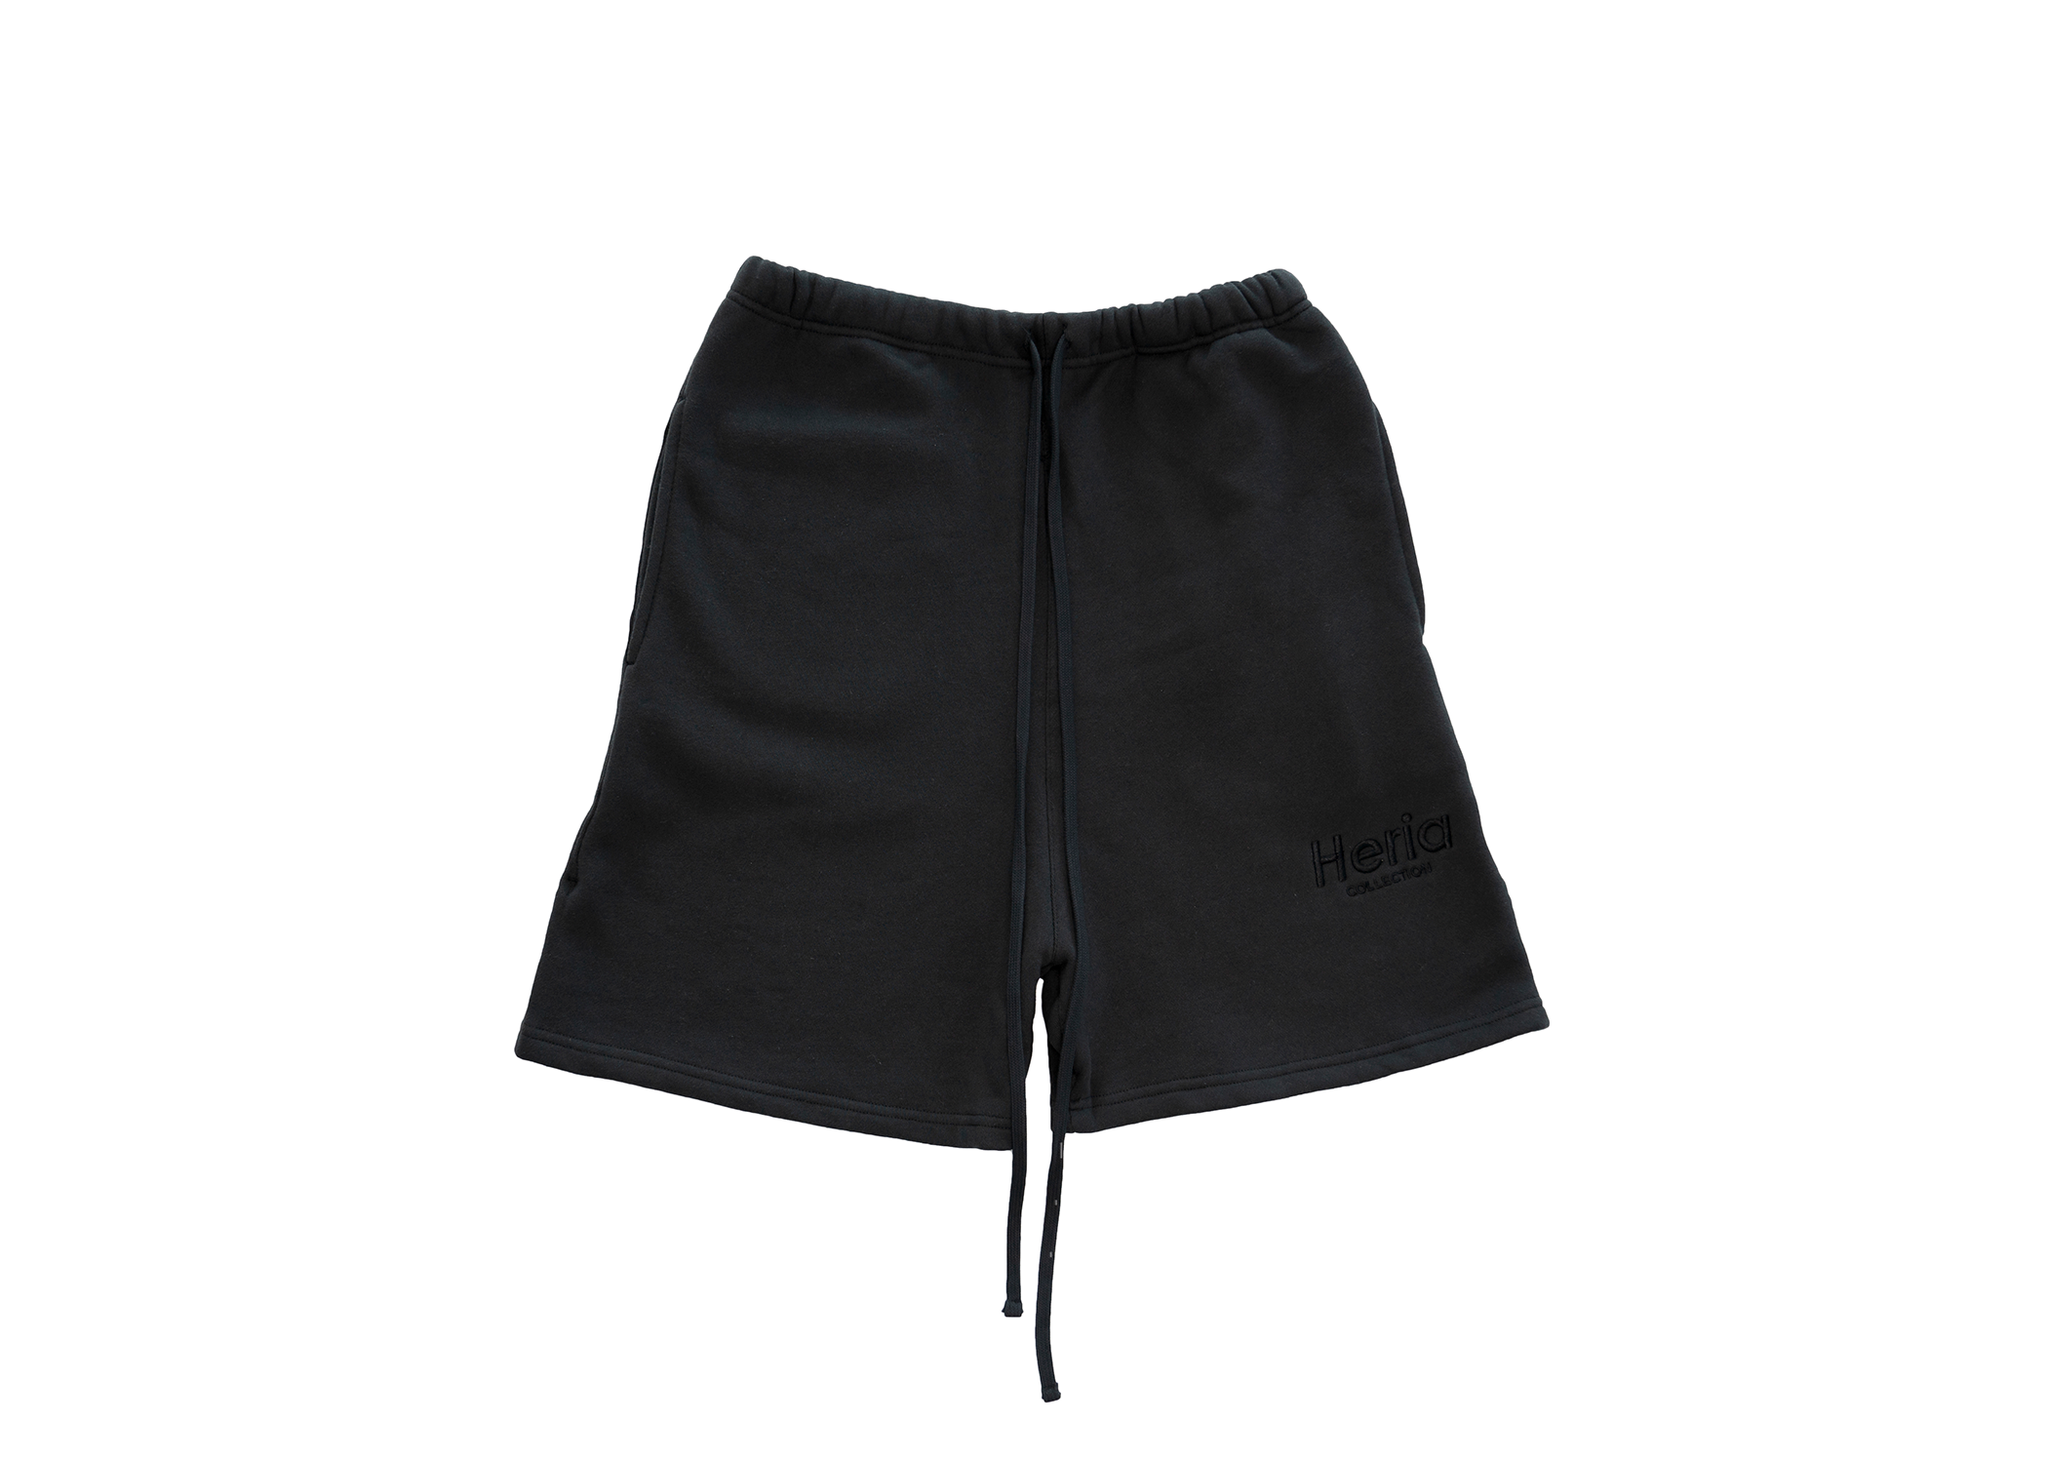 Heria Embroidered Sweat Shorts - Black (4680198946858)